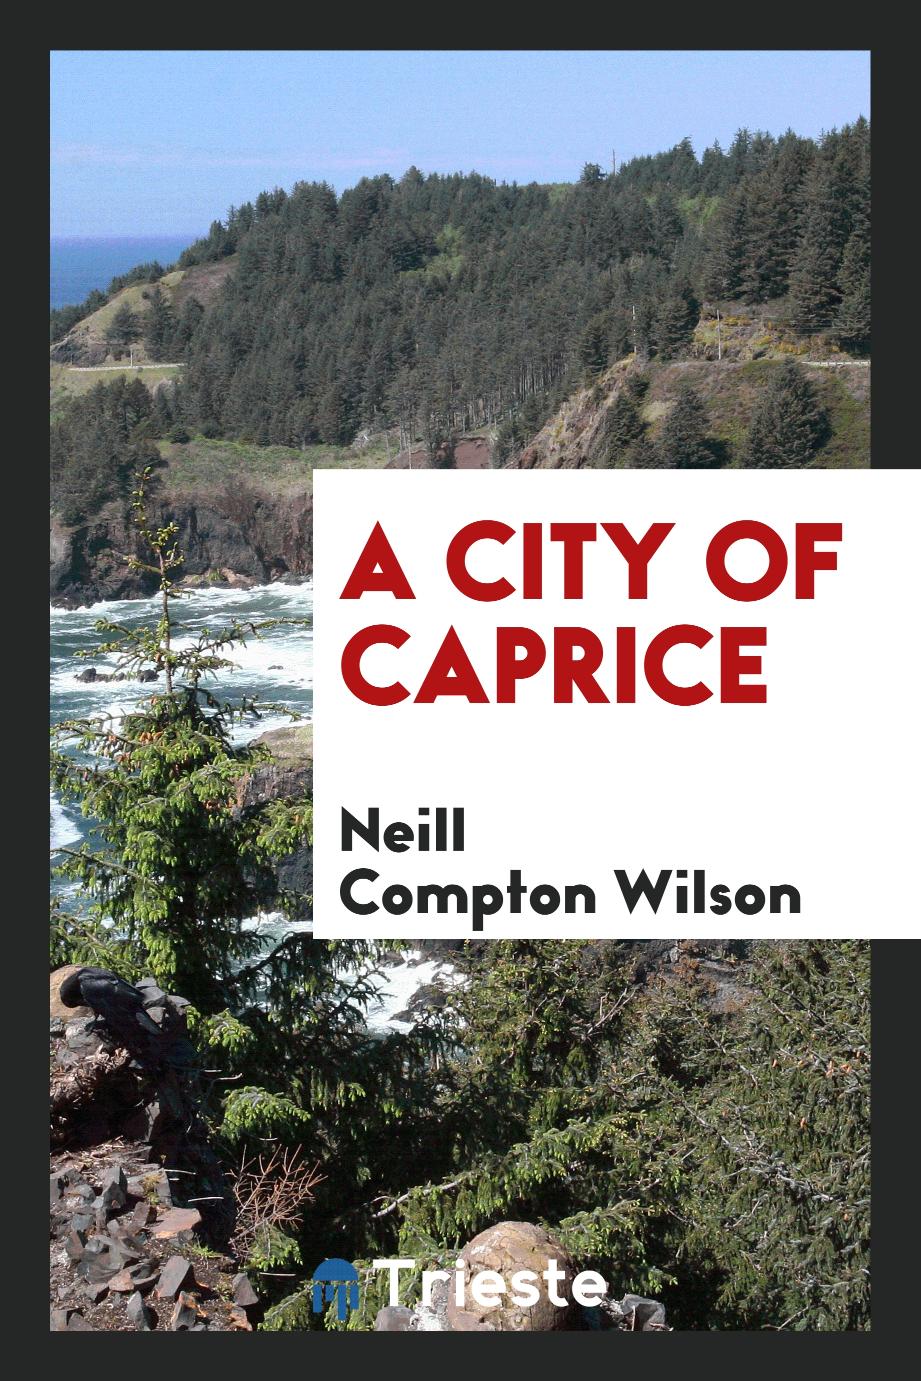 A City of Caprice